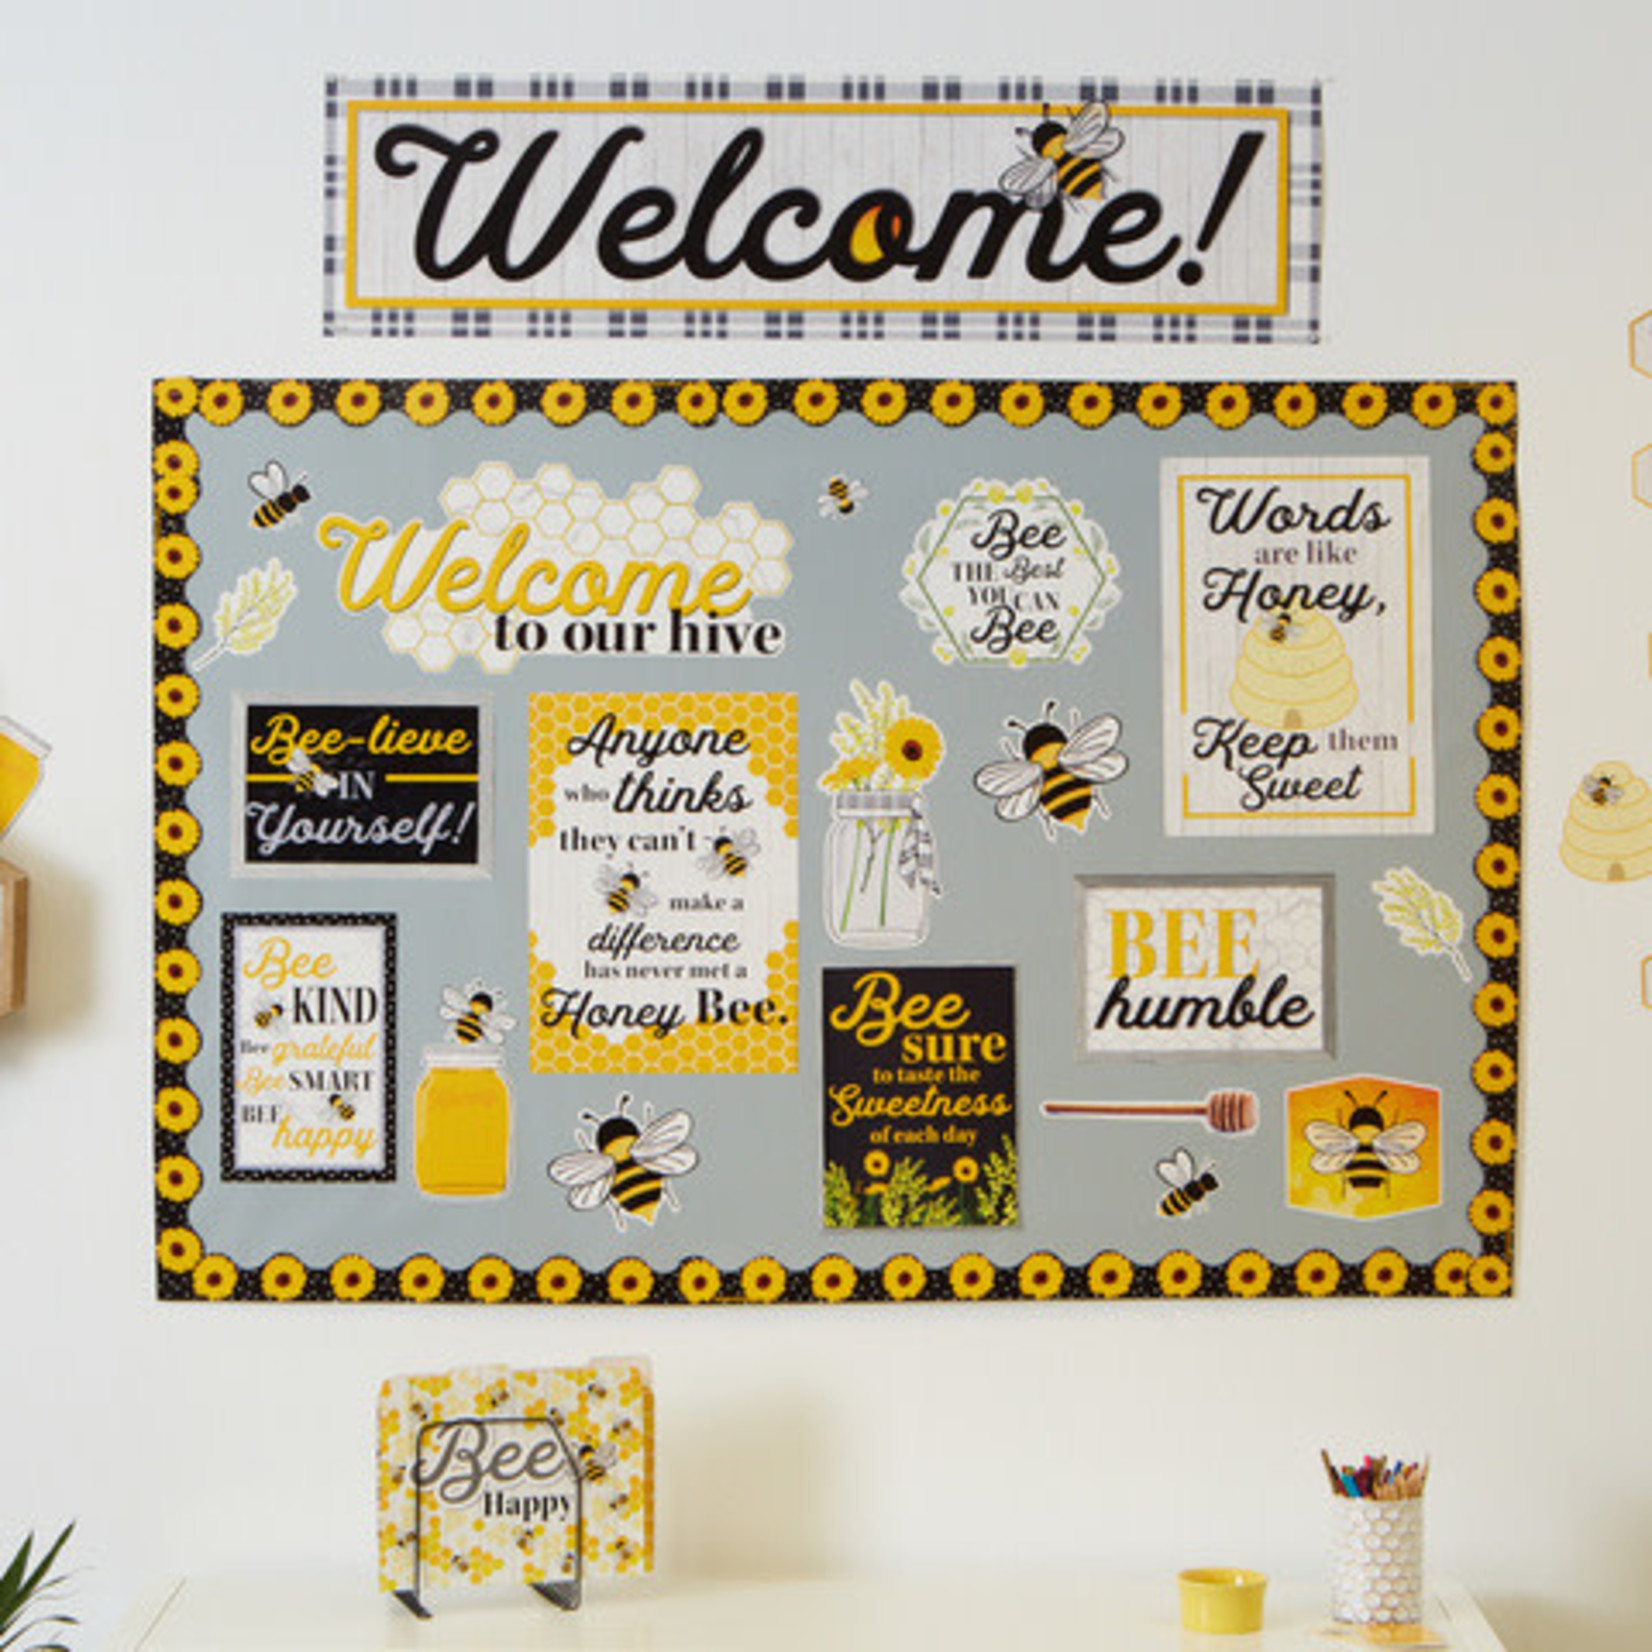 The Hive Motivational Gallery Wall Bulletin Board Set